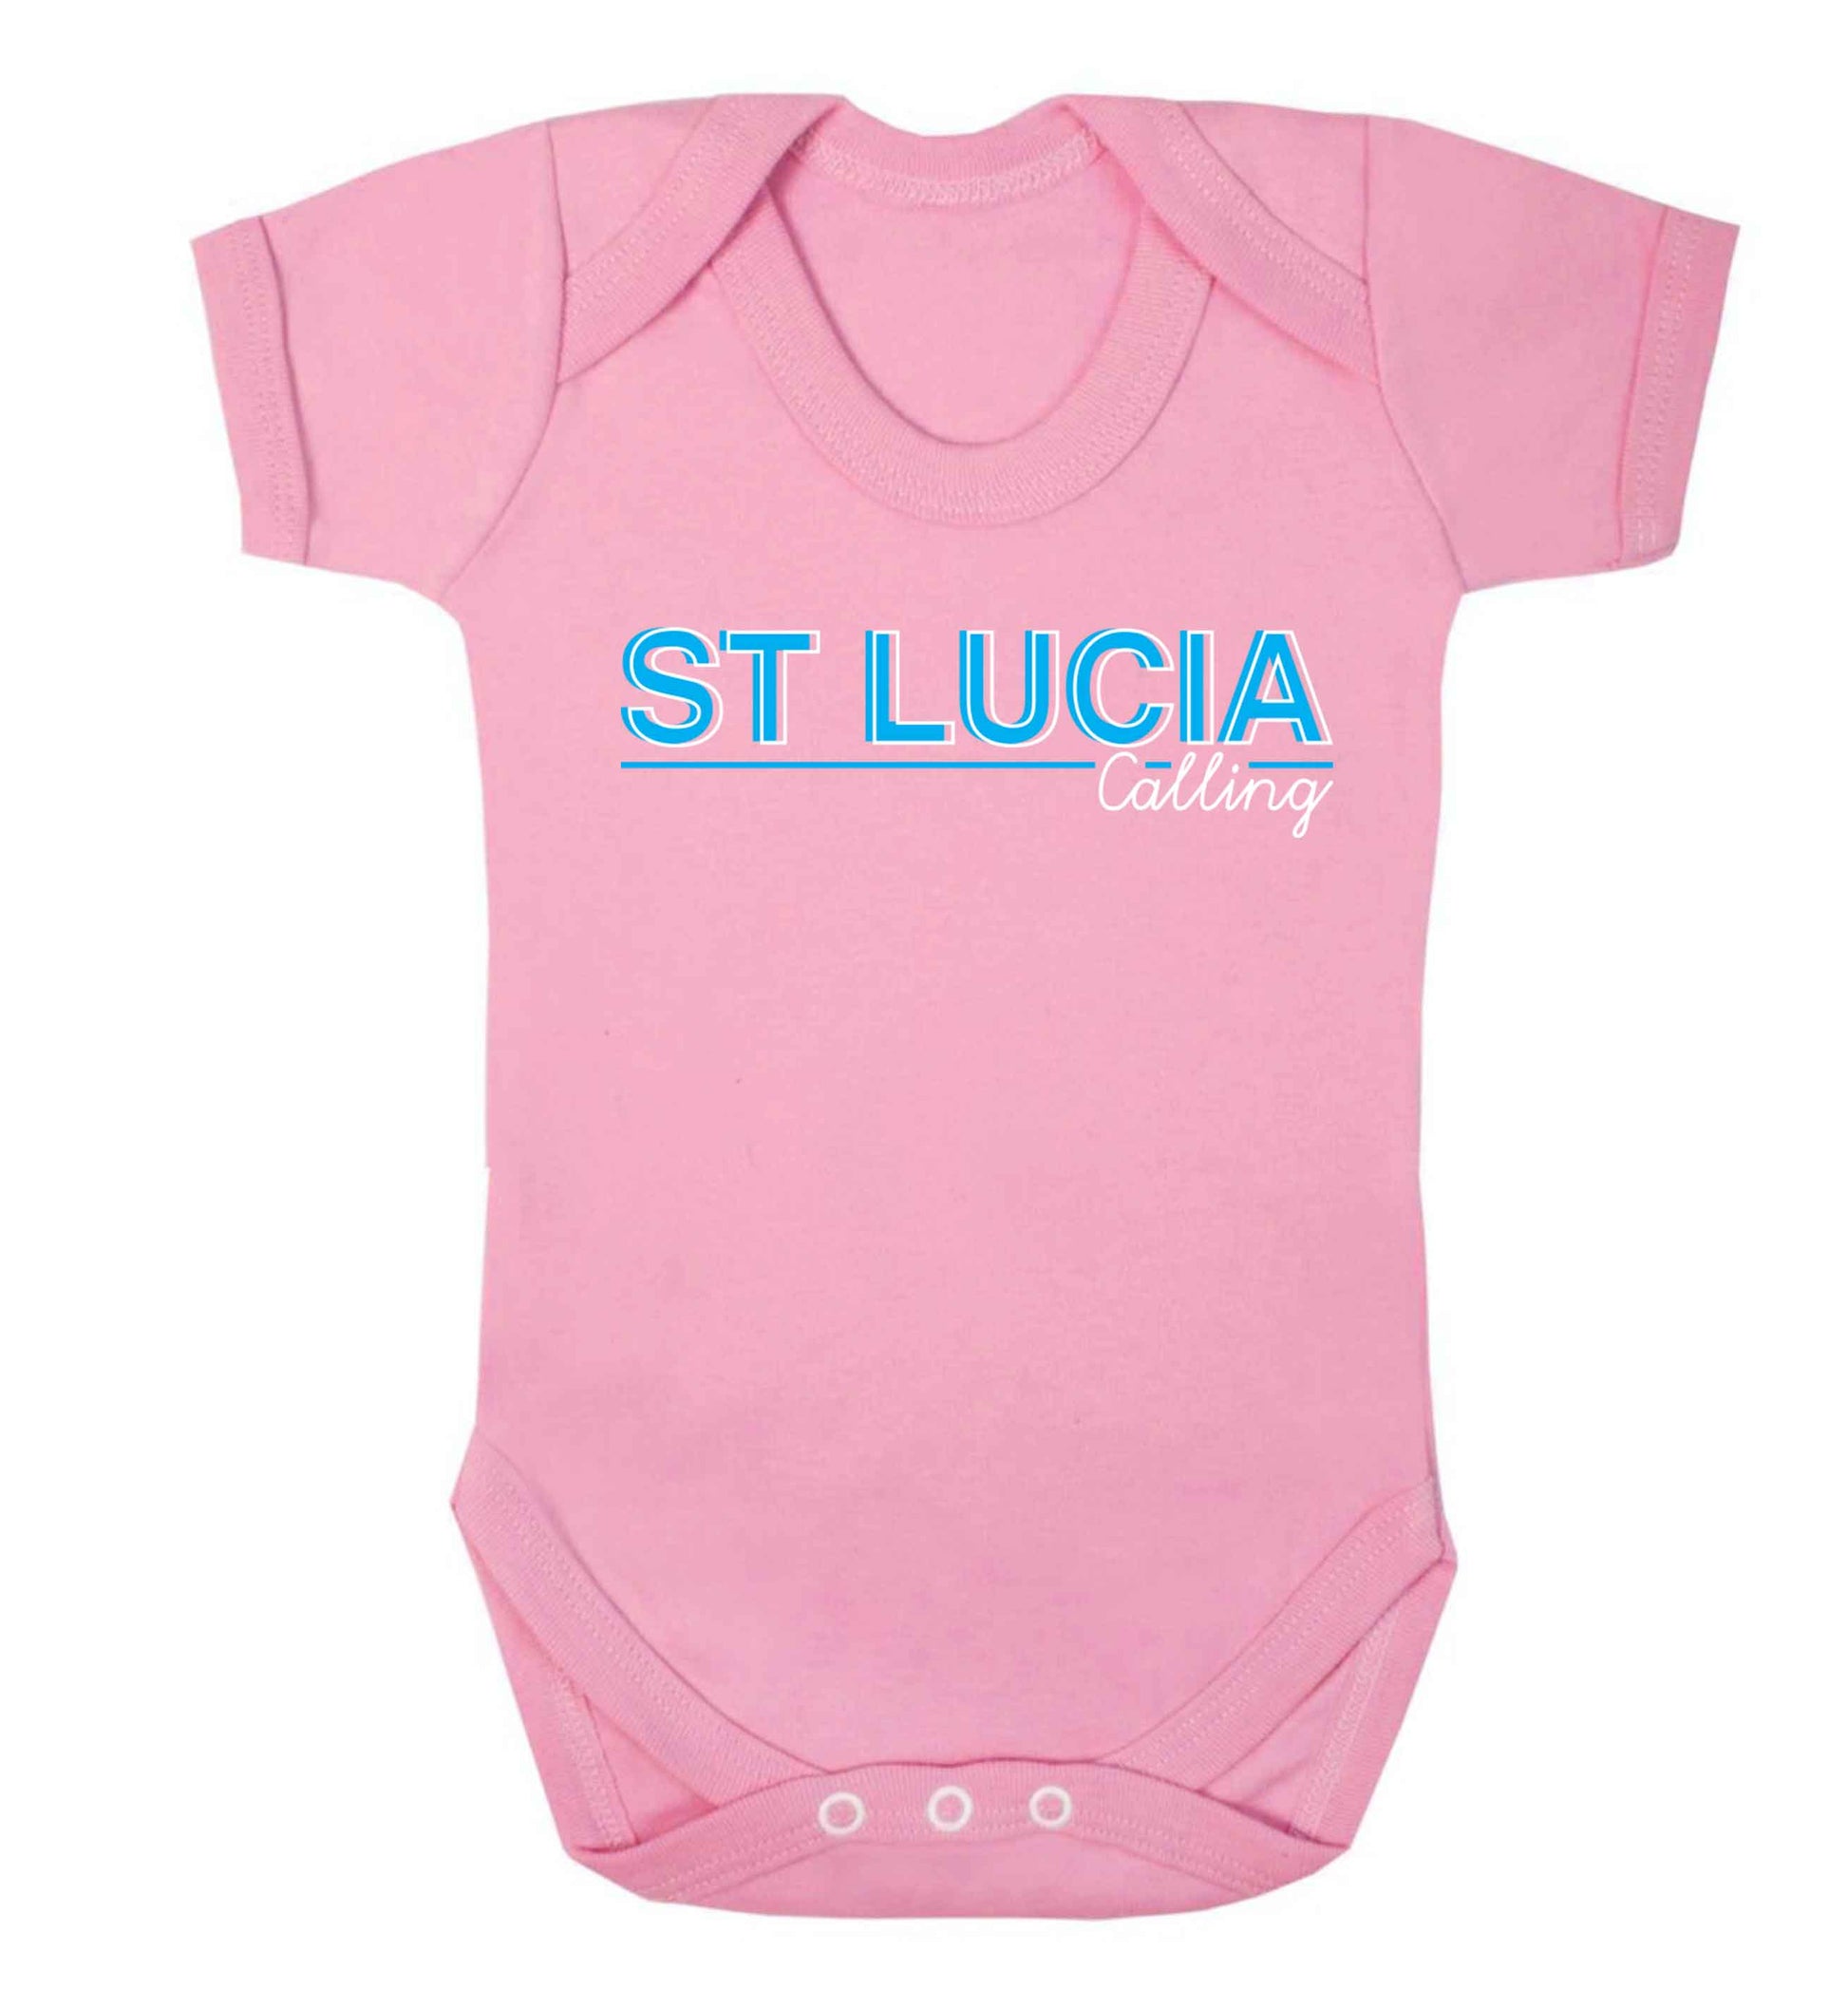 St Lucia calling Baby Vest pale pink 18-24 months